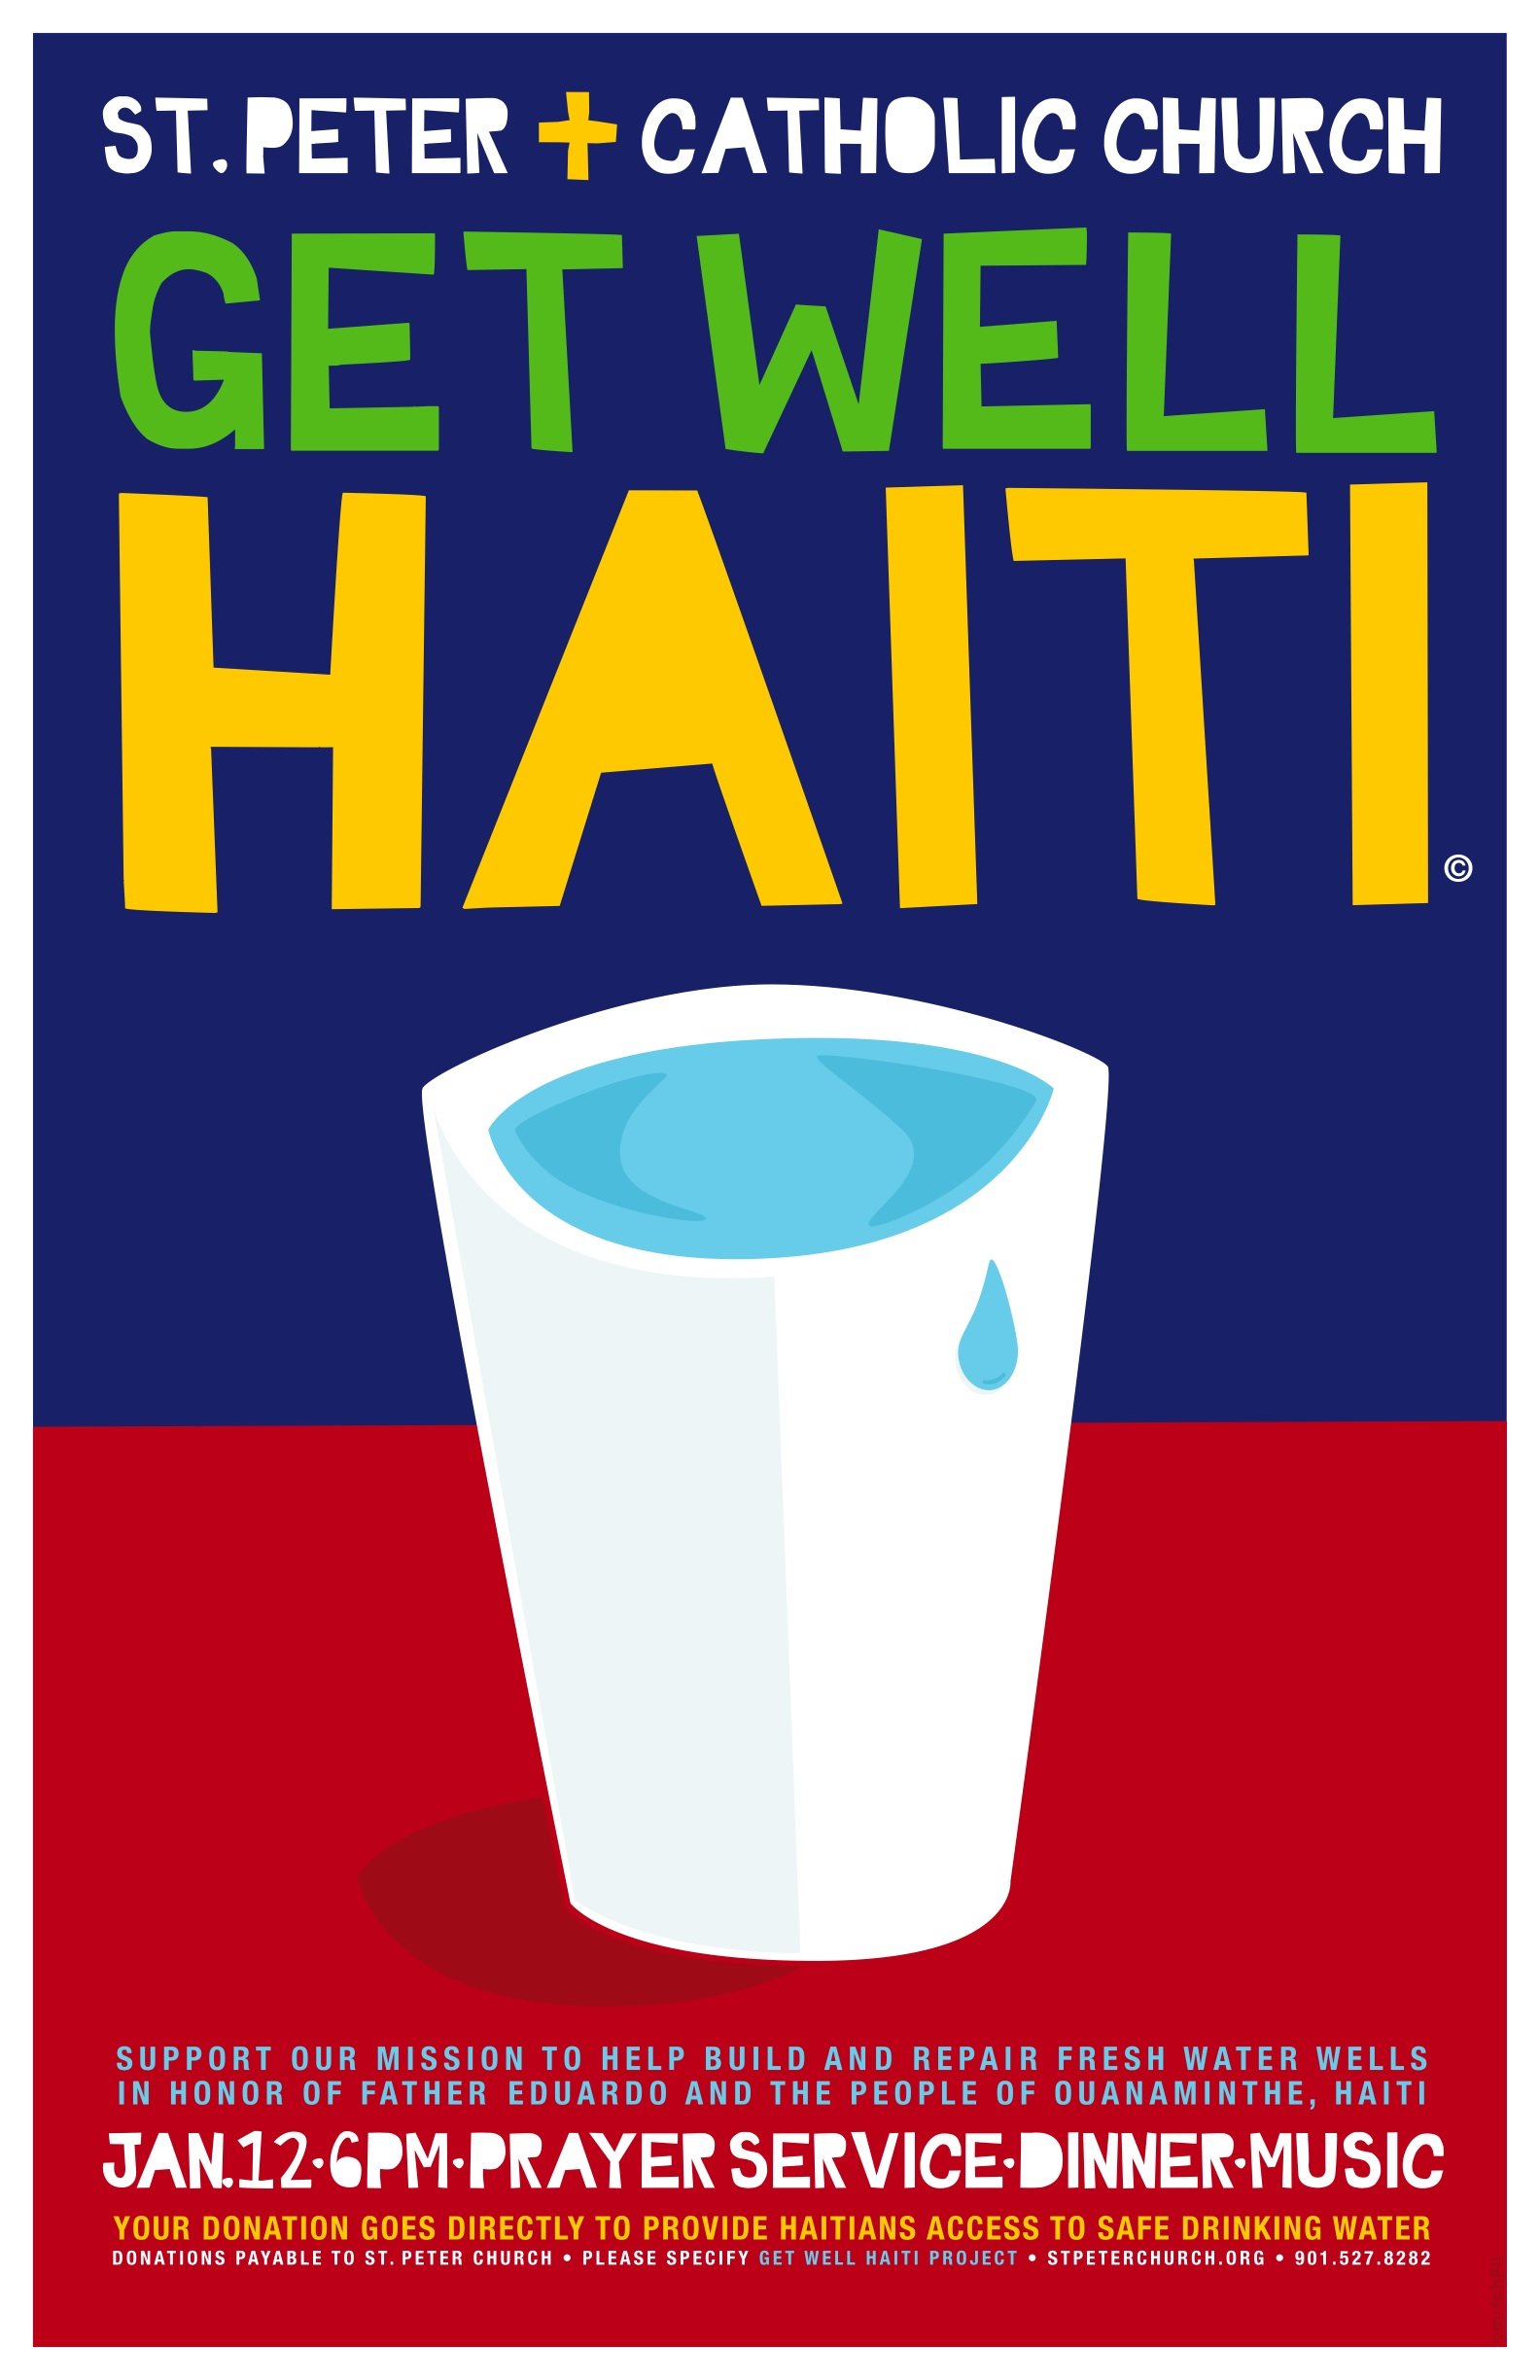  St. Peter Catholic Church “Get Well Haiti” mission project to help build and repair fresh water wells in Ouanaminthe, Haiti  Event held in honor of Fr. Eduardo Logiste, O.P.  Poster &amp; marketing materials  Branding creative, copywriting and desig